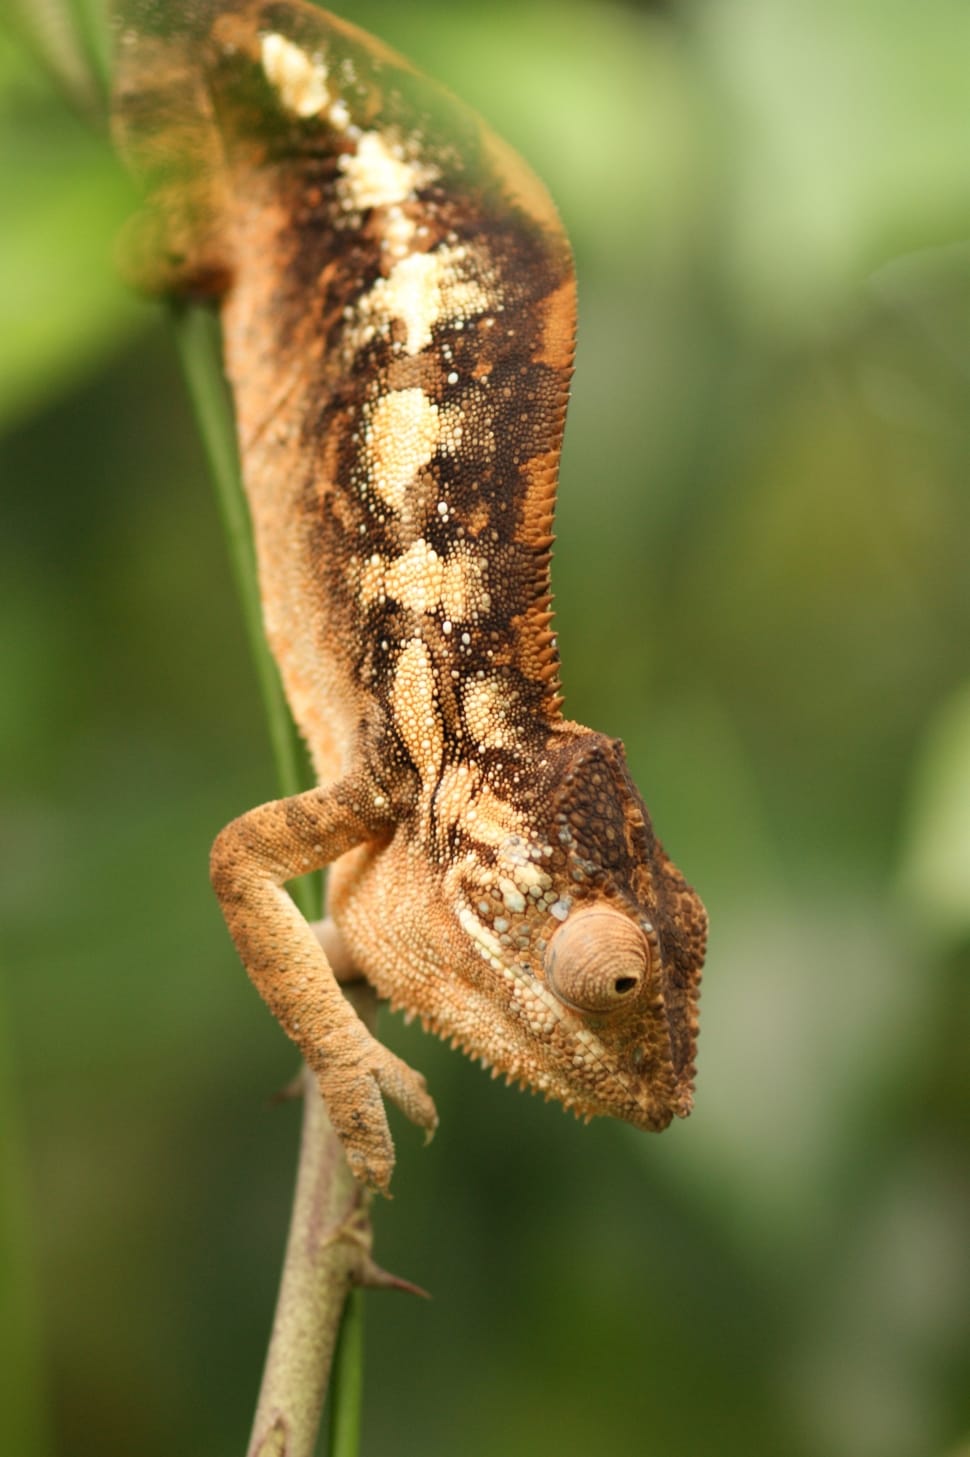 brown, white and black chameleon in closeup photography preview